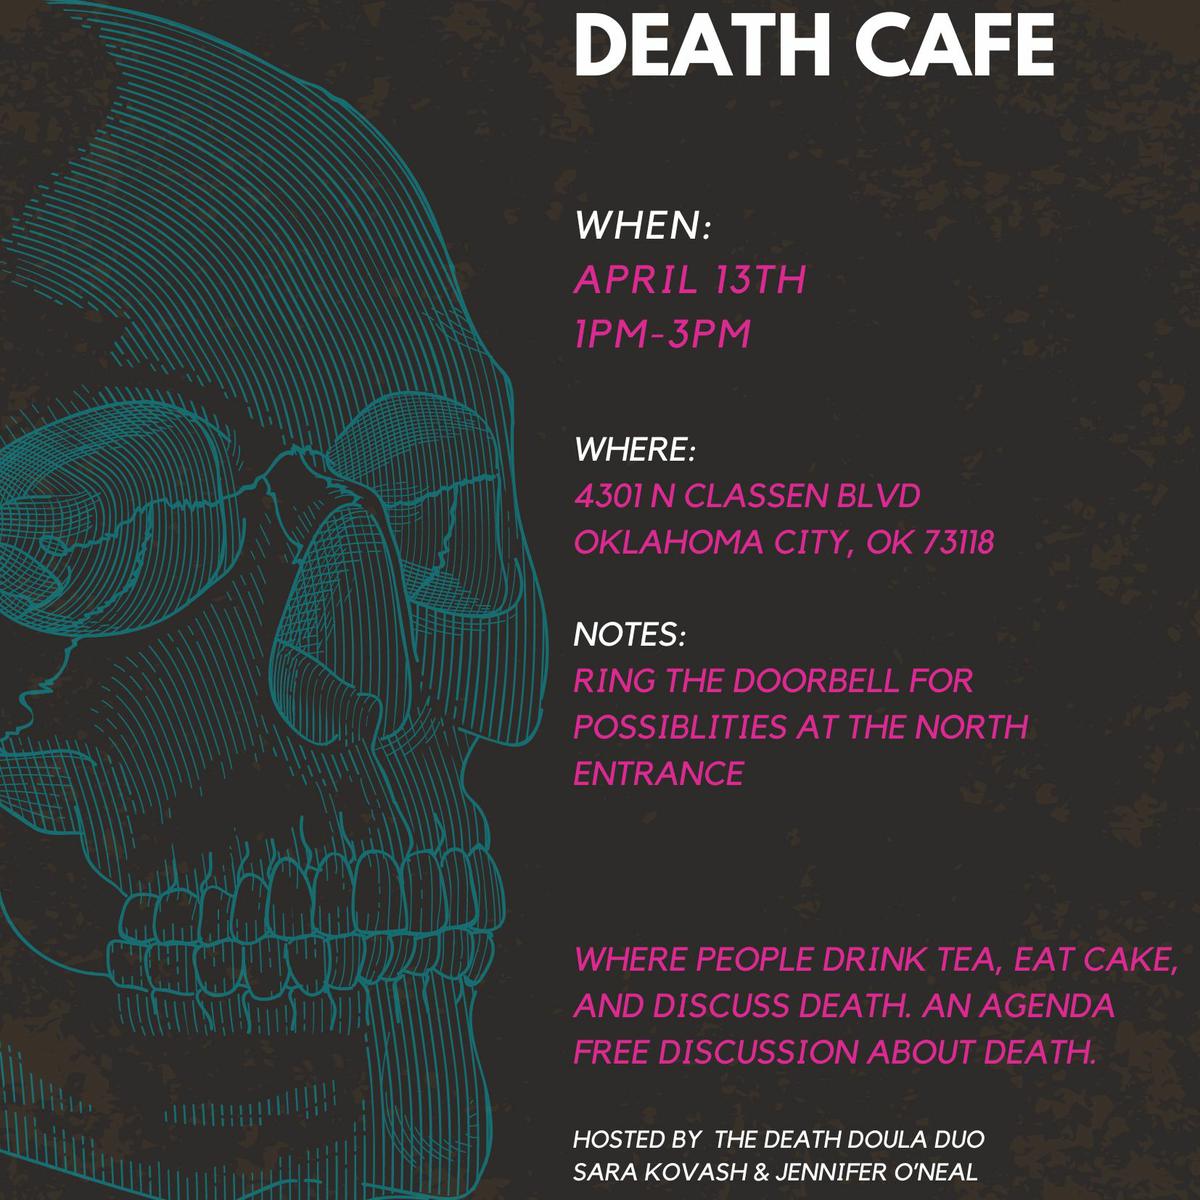 Oklahoma City Death Cafe hosted by The Death Doula Duo 